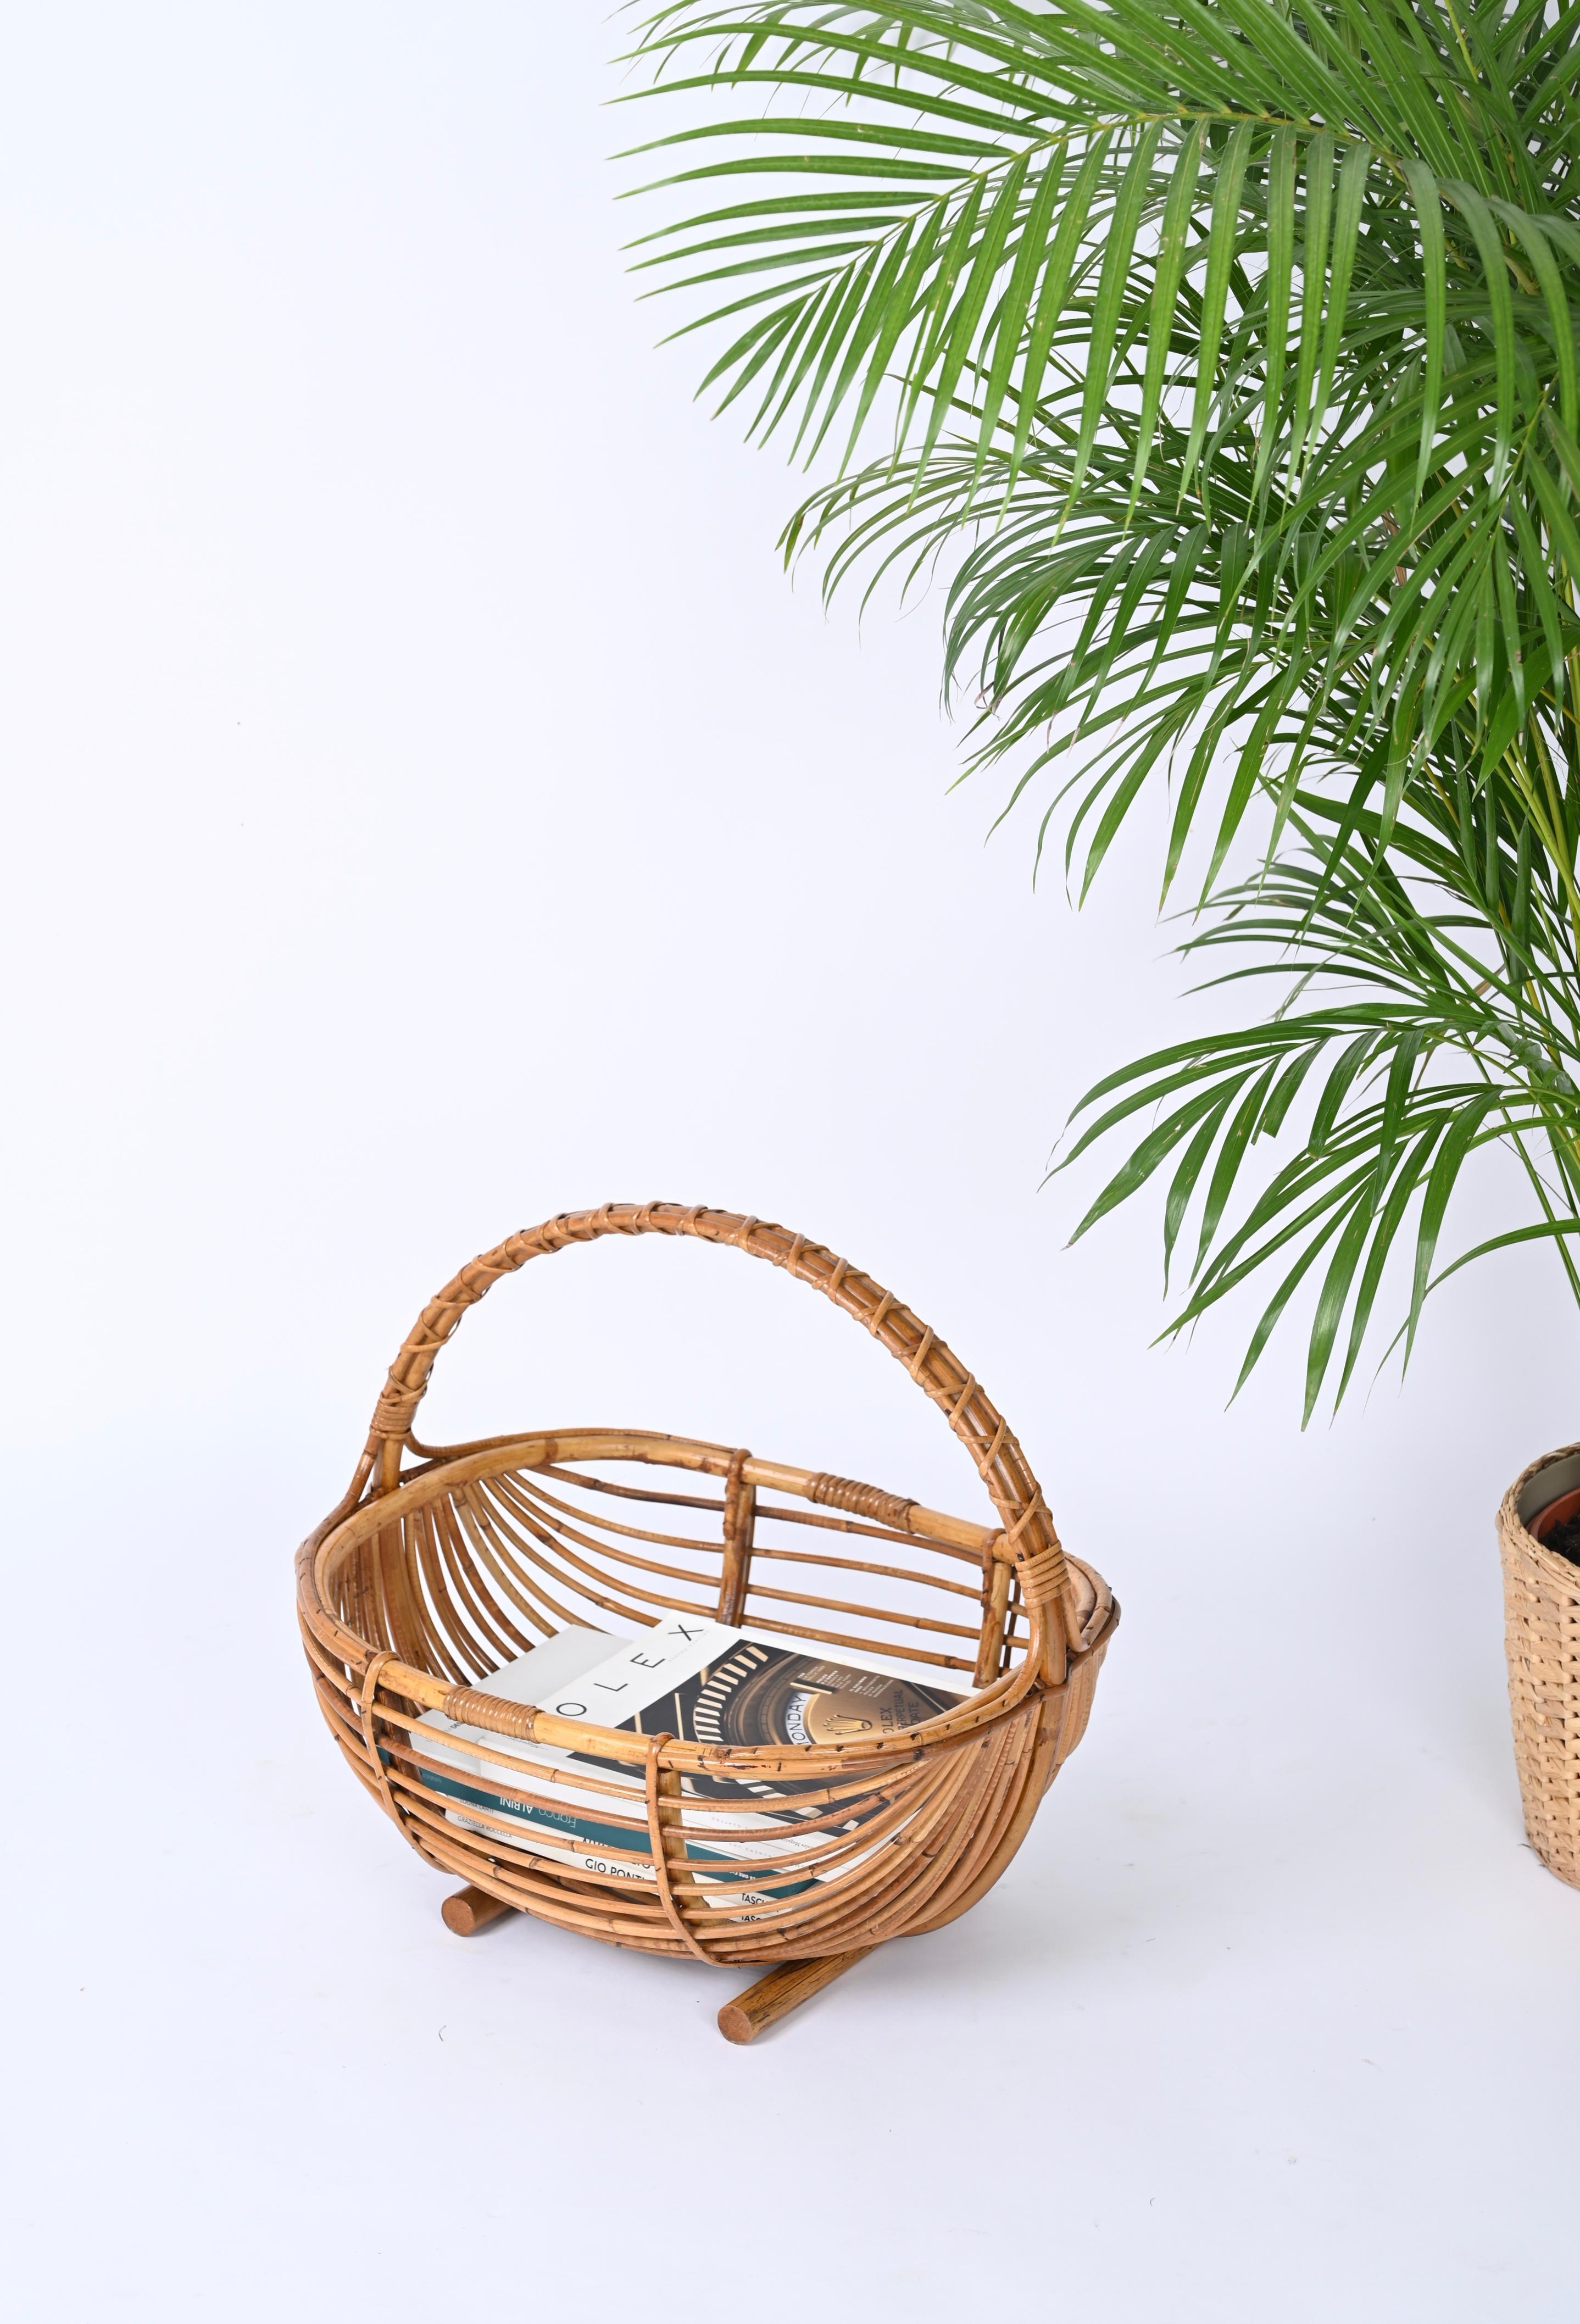 Gorgeous French Riviera style basket magazine rack in bamboo and rattan. This wonderful piece was designed in Italy during 1970s.

This lovely item can be used either o store magazines or vinyls. Fully made in a combination of curved bamboo canes